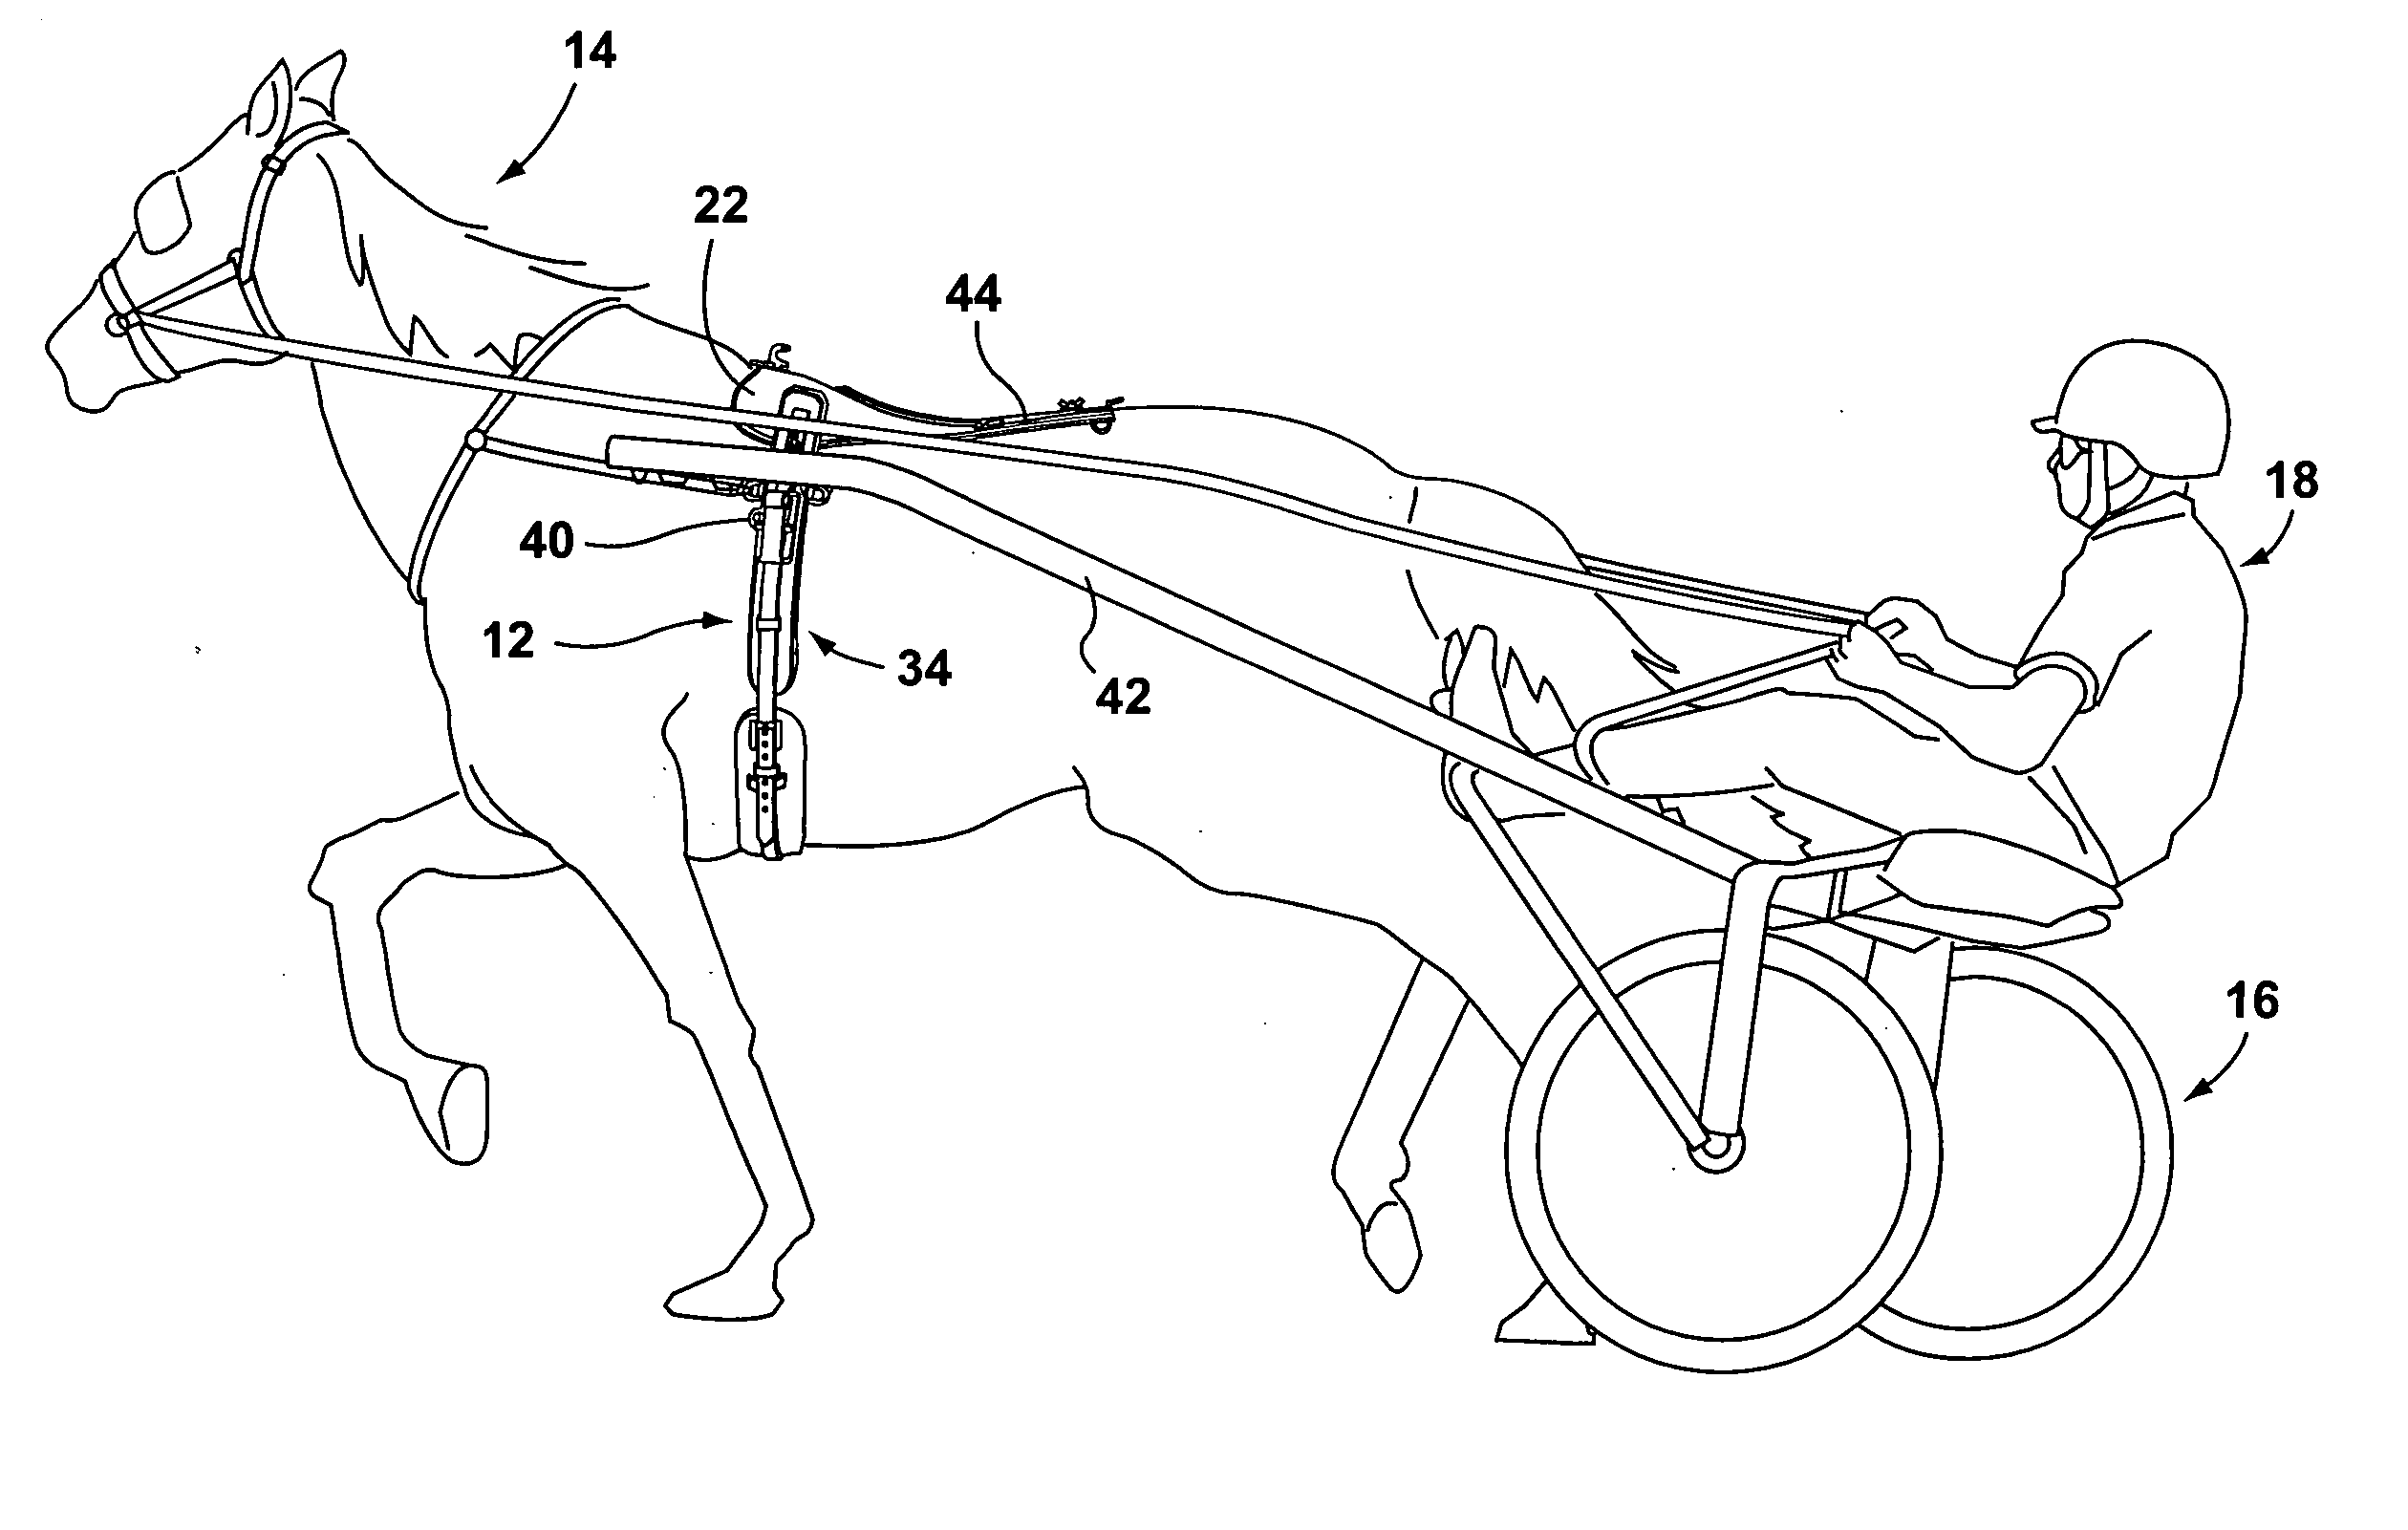 Harness for use in harness racing